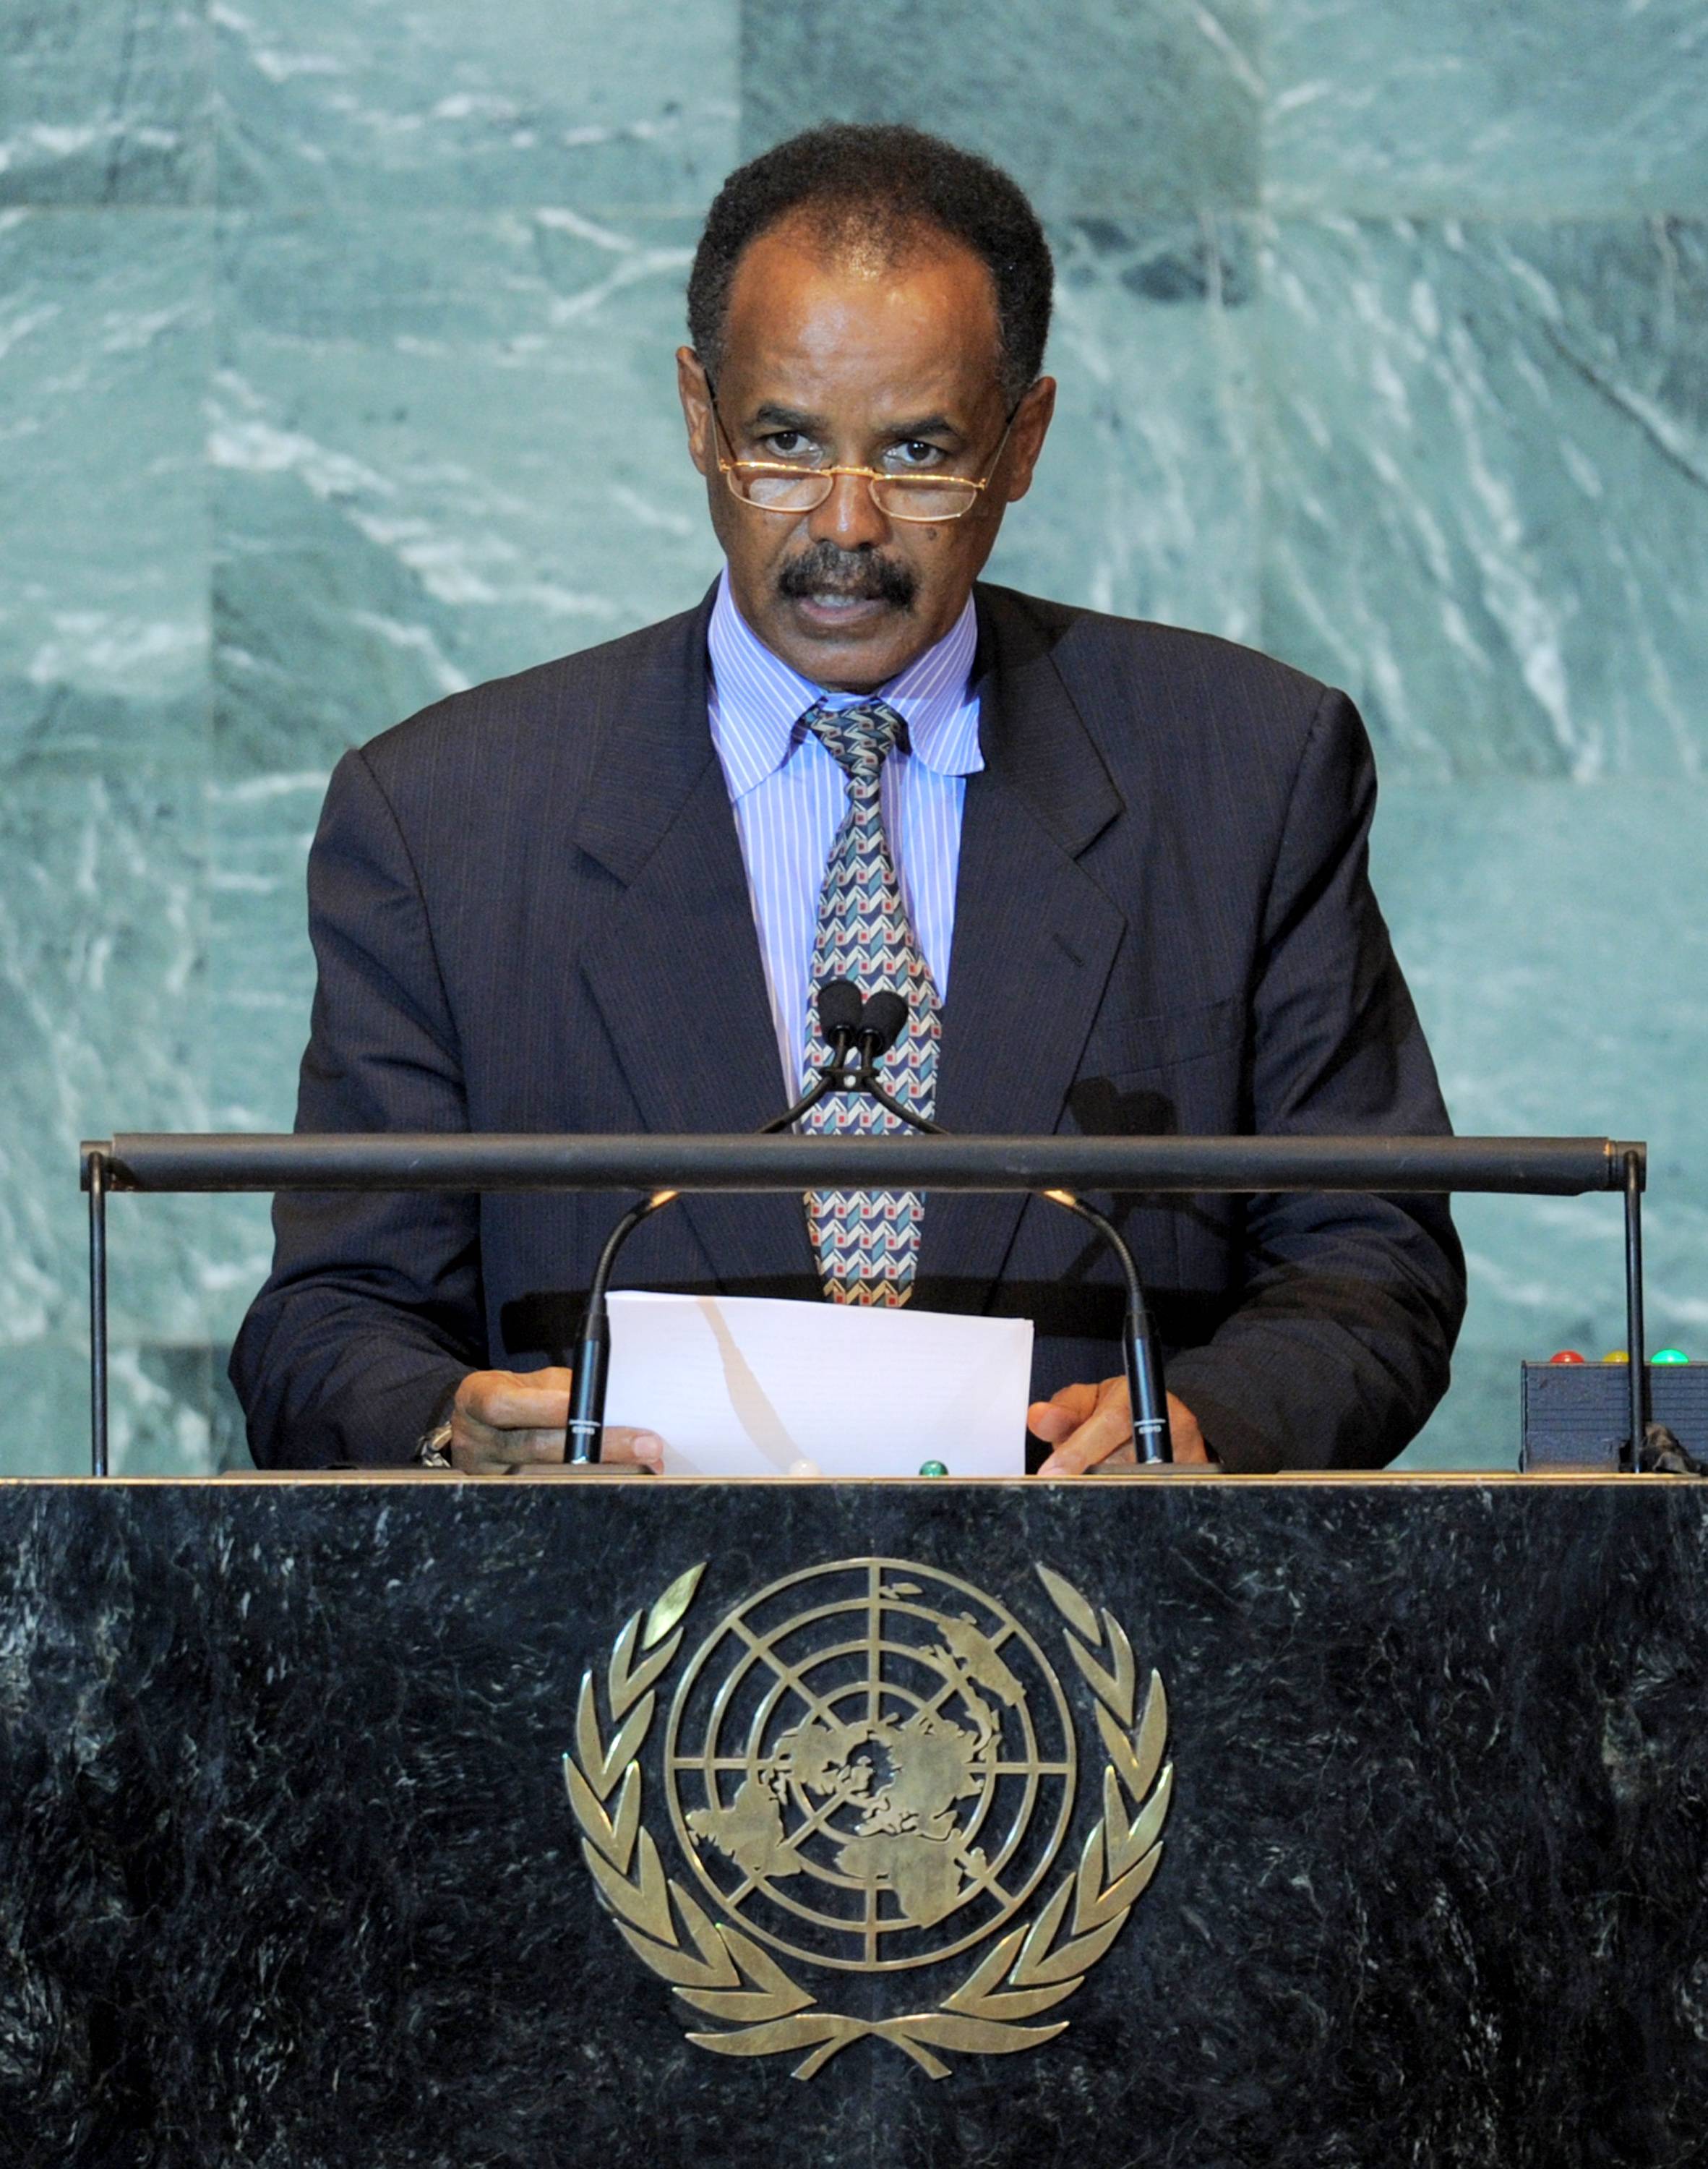 Eritrea Slapped With More Sanctions - The U.N. Security Council hit the African nation of Eritrea with additional sanctions for continuing to provide support to armed groups seeking to destabilize Somalia and other parts of the Horn of Africa.\r(Photo credit: STAN HONDA/AFP/Getty Images)